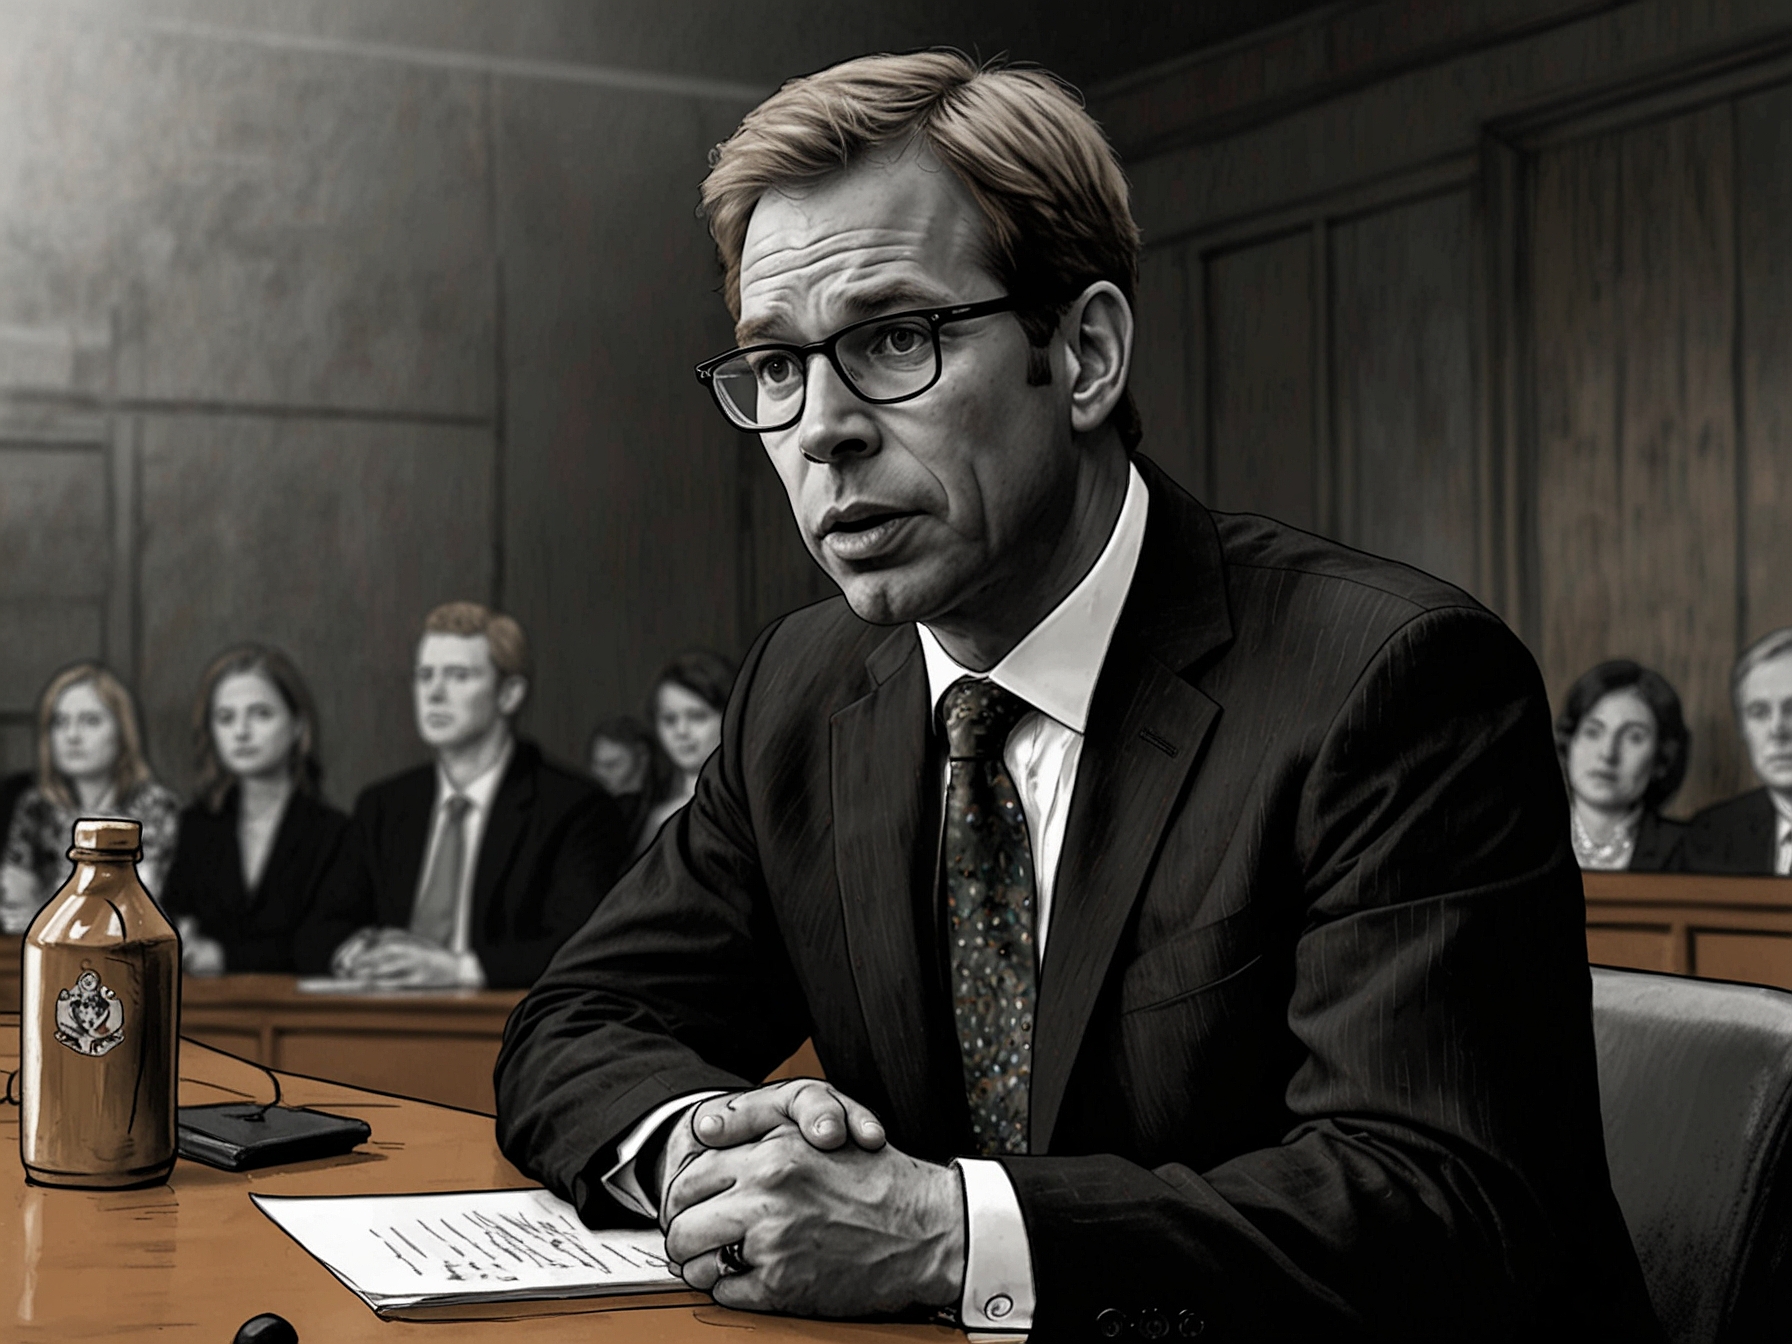 A grim-faced Tobias Ellwood speaking at a press conference, emphasizing the need for stringent action and accountability within the Conservative Party amidst betting allegations.